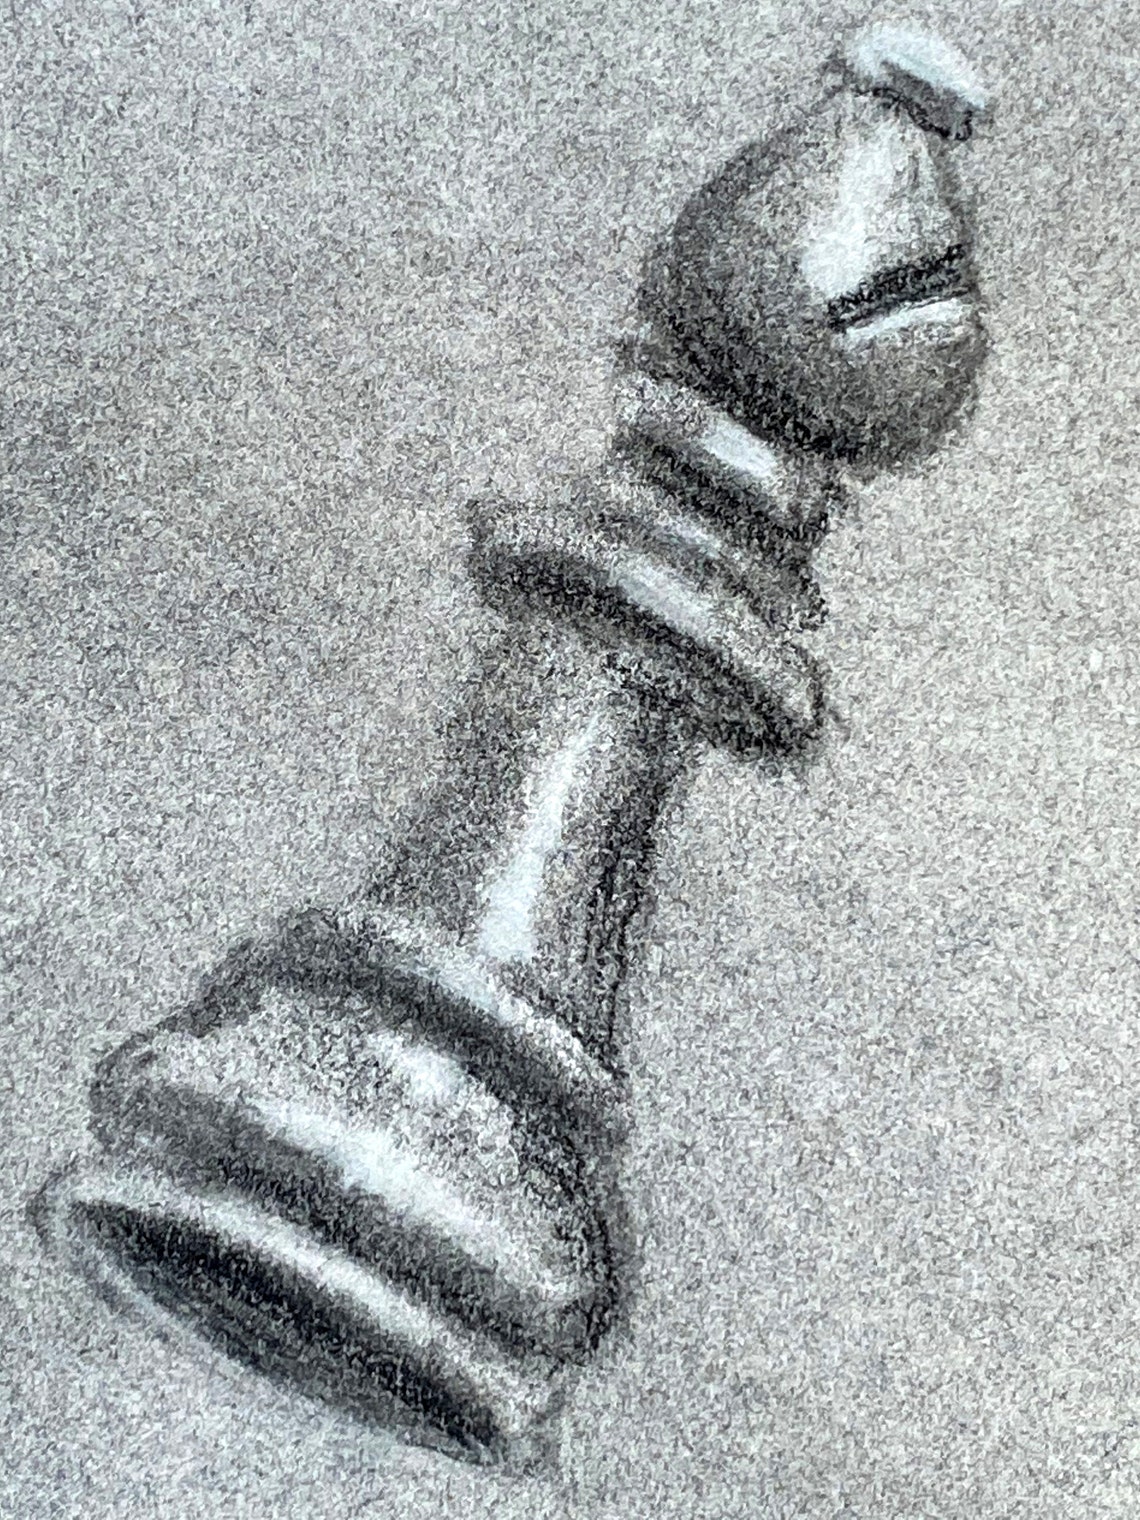 Hand-Drawn Chess Pieces | Etsy